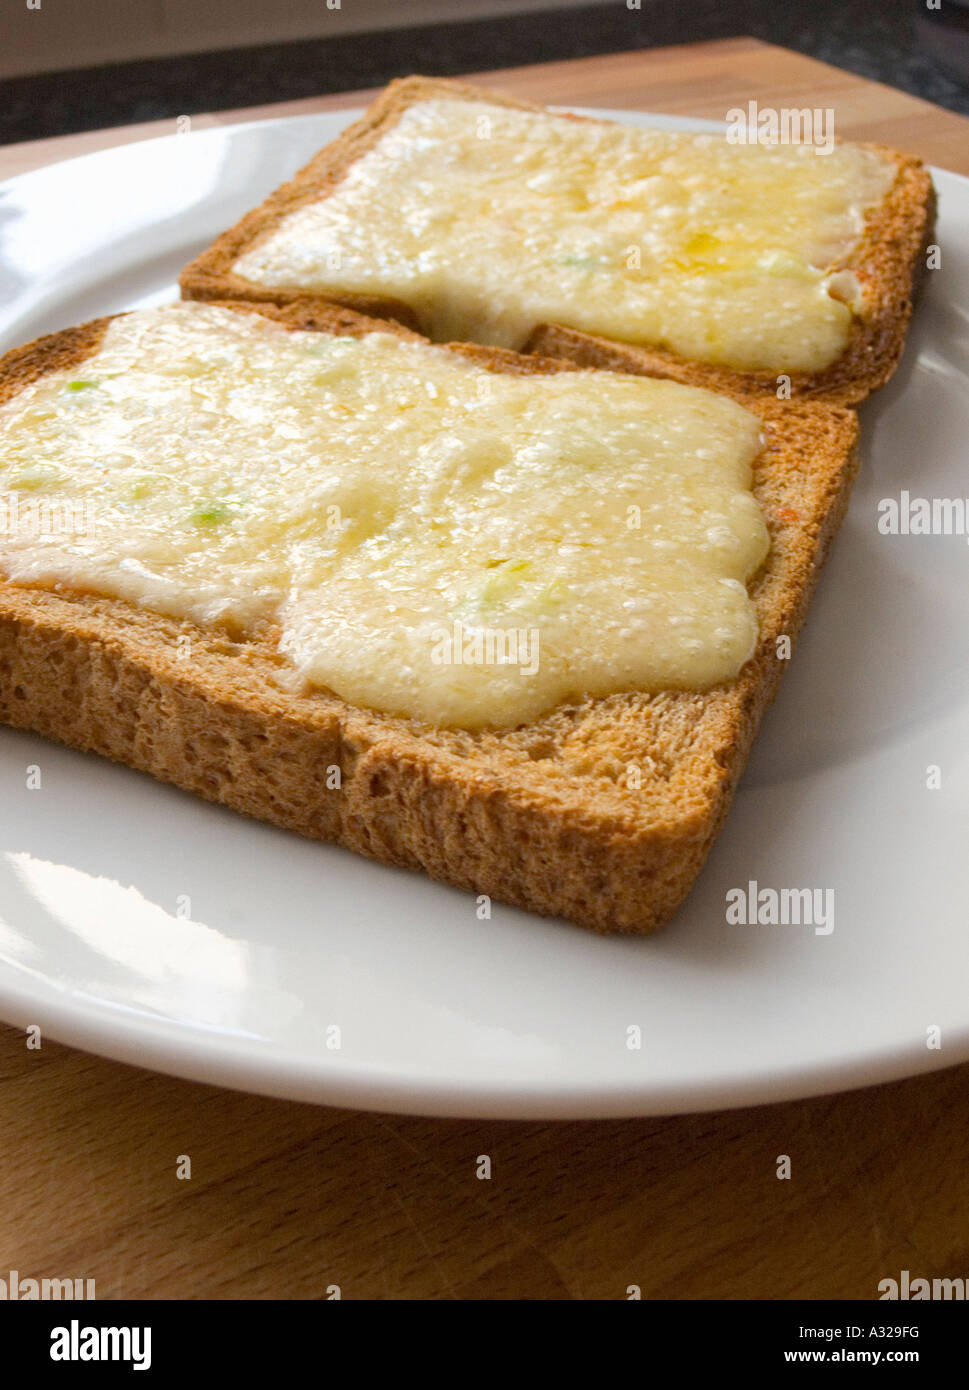 Cheese melt melted on wholemeal brown Toast bread on a plate grill grilled hot Stock Photo